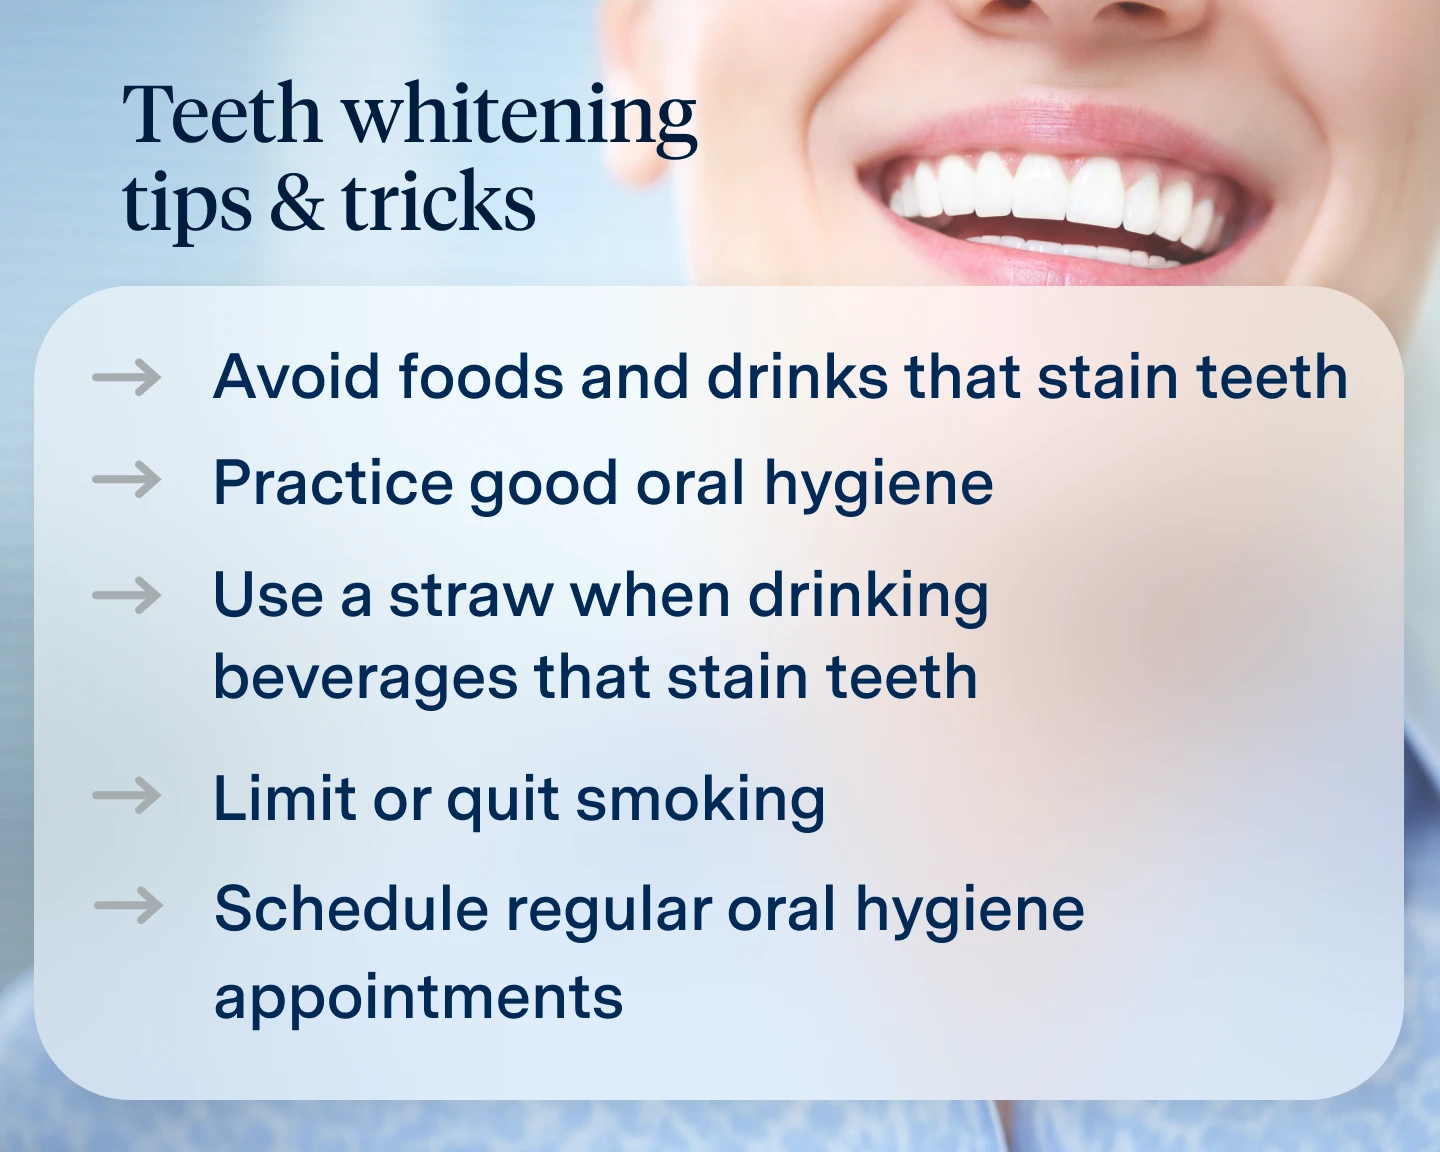 Avoid foods and drinks that stain teeth, Practice good oral hygiene, Use a straw when drinking beverages that stain teeth, Limit or quit smoking, Schedule regular oral hygiene appointments.